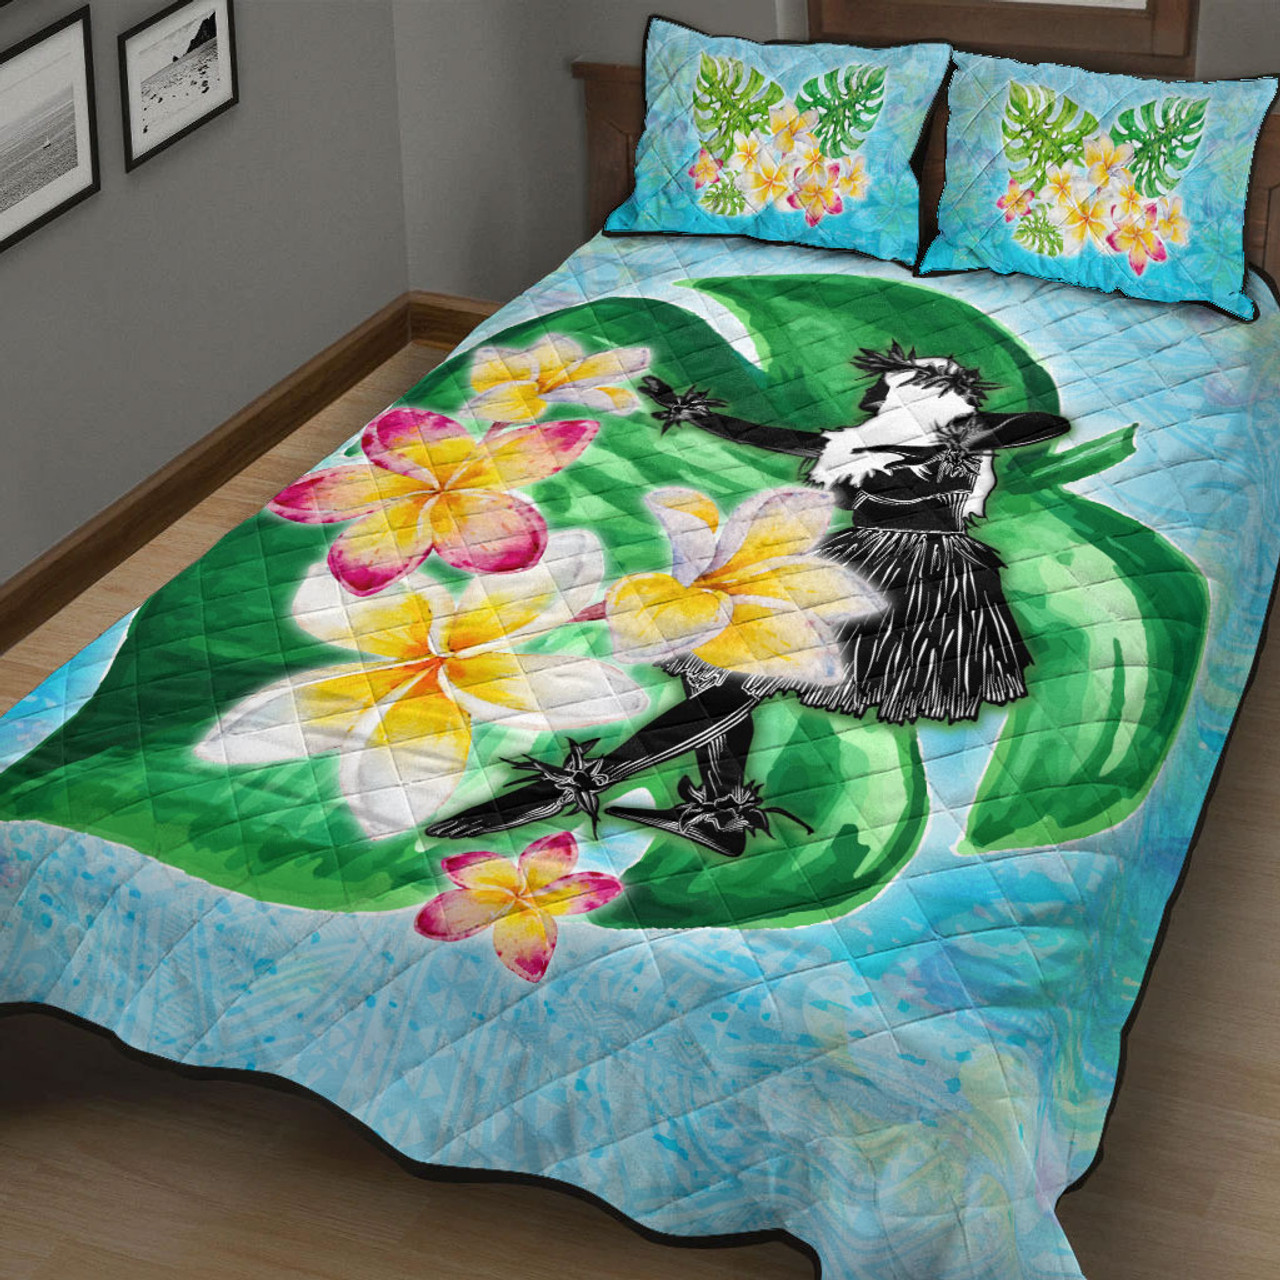 Hawaii Quilt Bed Set Hula Girls With Tropical Flowers Polynesian Style